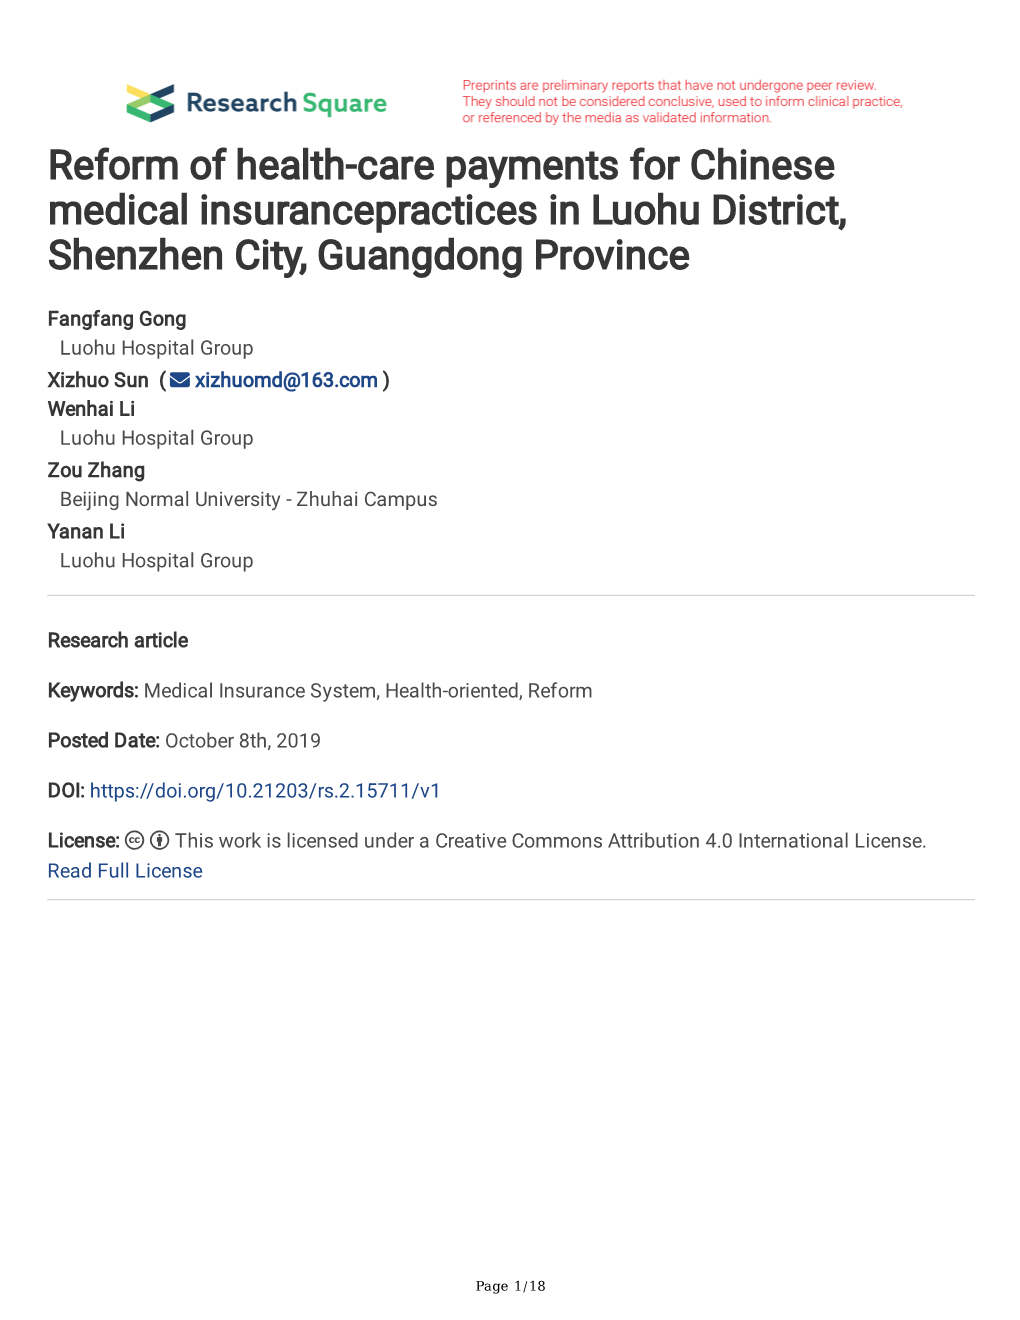 Reform of Health-Care Payments for Chinese Medical Insurancepractices in Luohu District, Shenzhen City, Guangdong Province